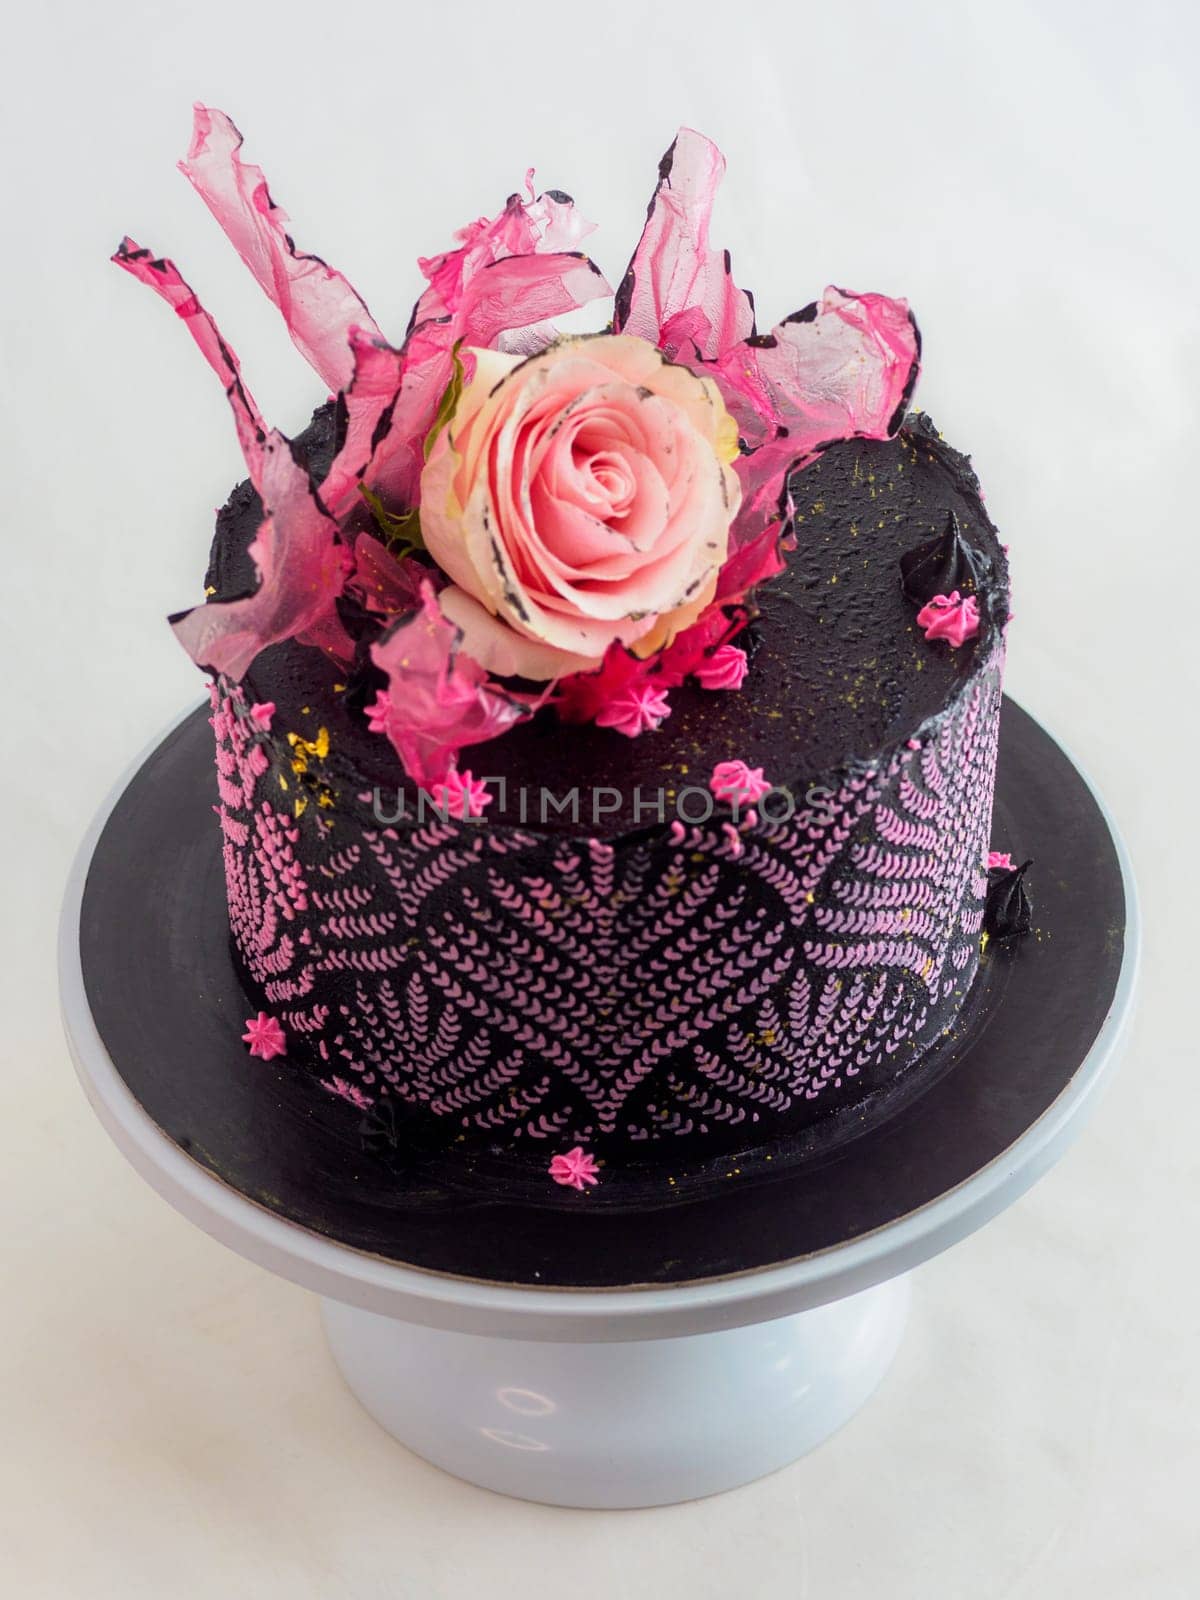 frosted icing black decorate cake for birthday celebration, real rose topping and pink sweet swirls by verbano